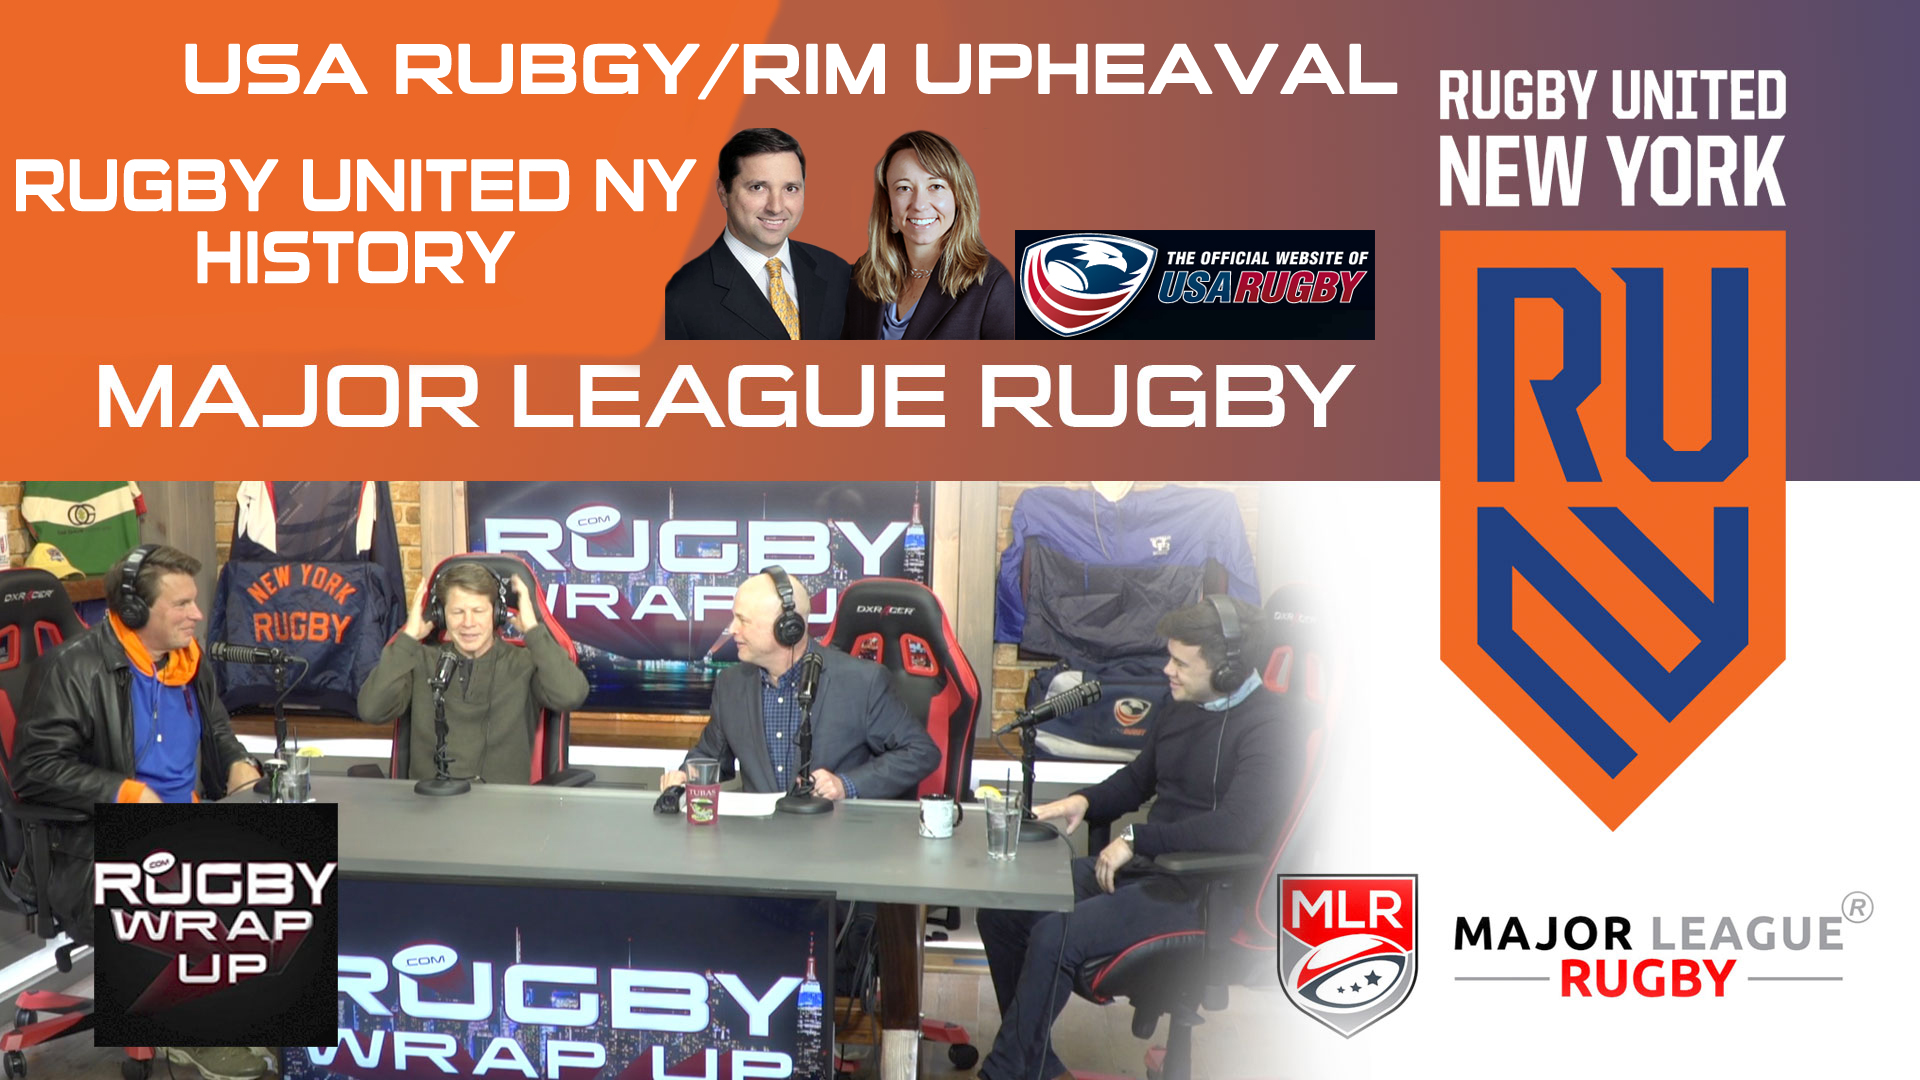 USA Rugby, Congress, Rim, Sternberg, Rugby-United-New-York-MLR-Rugby_Wrap_Up